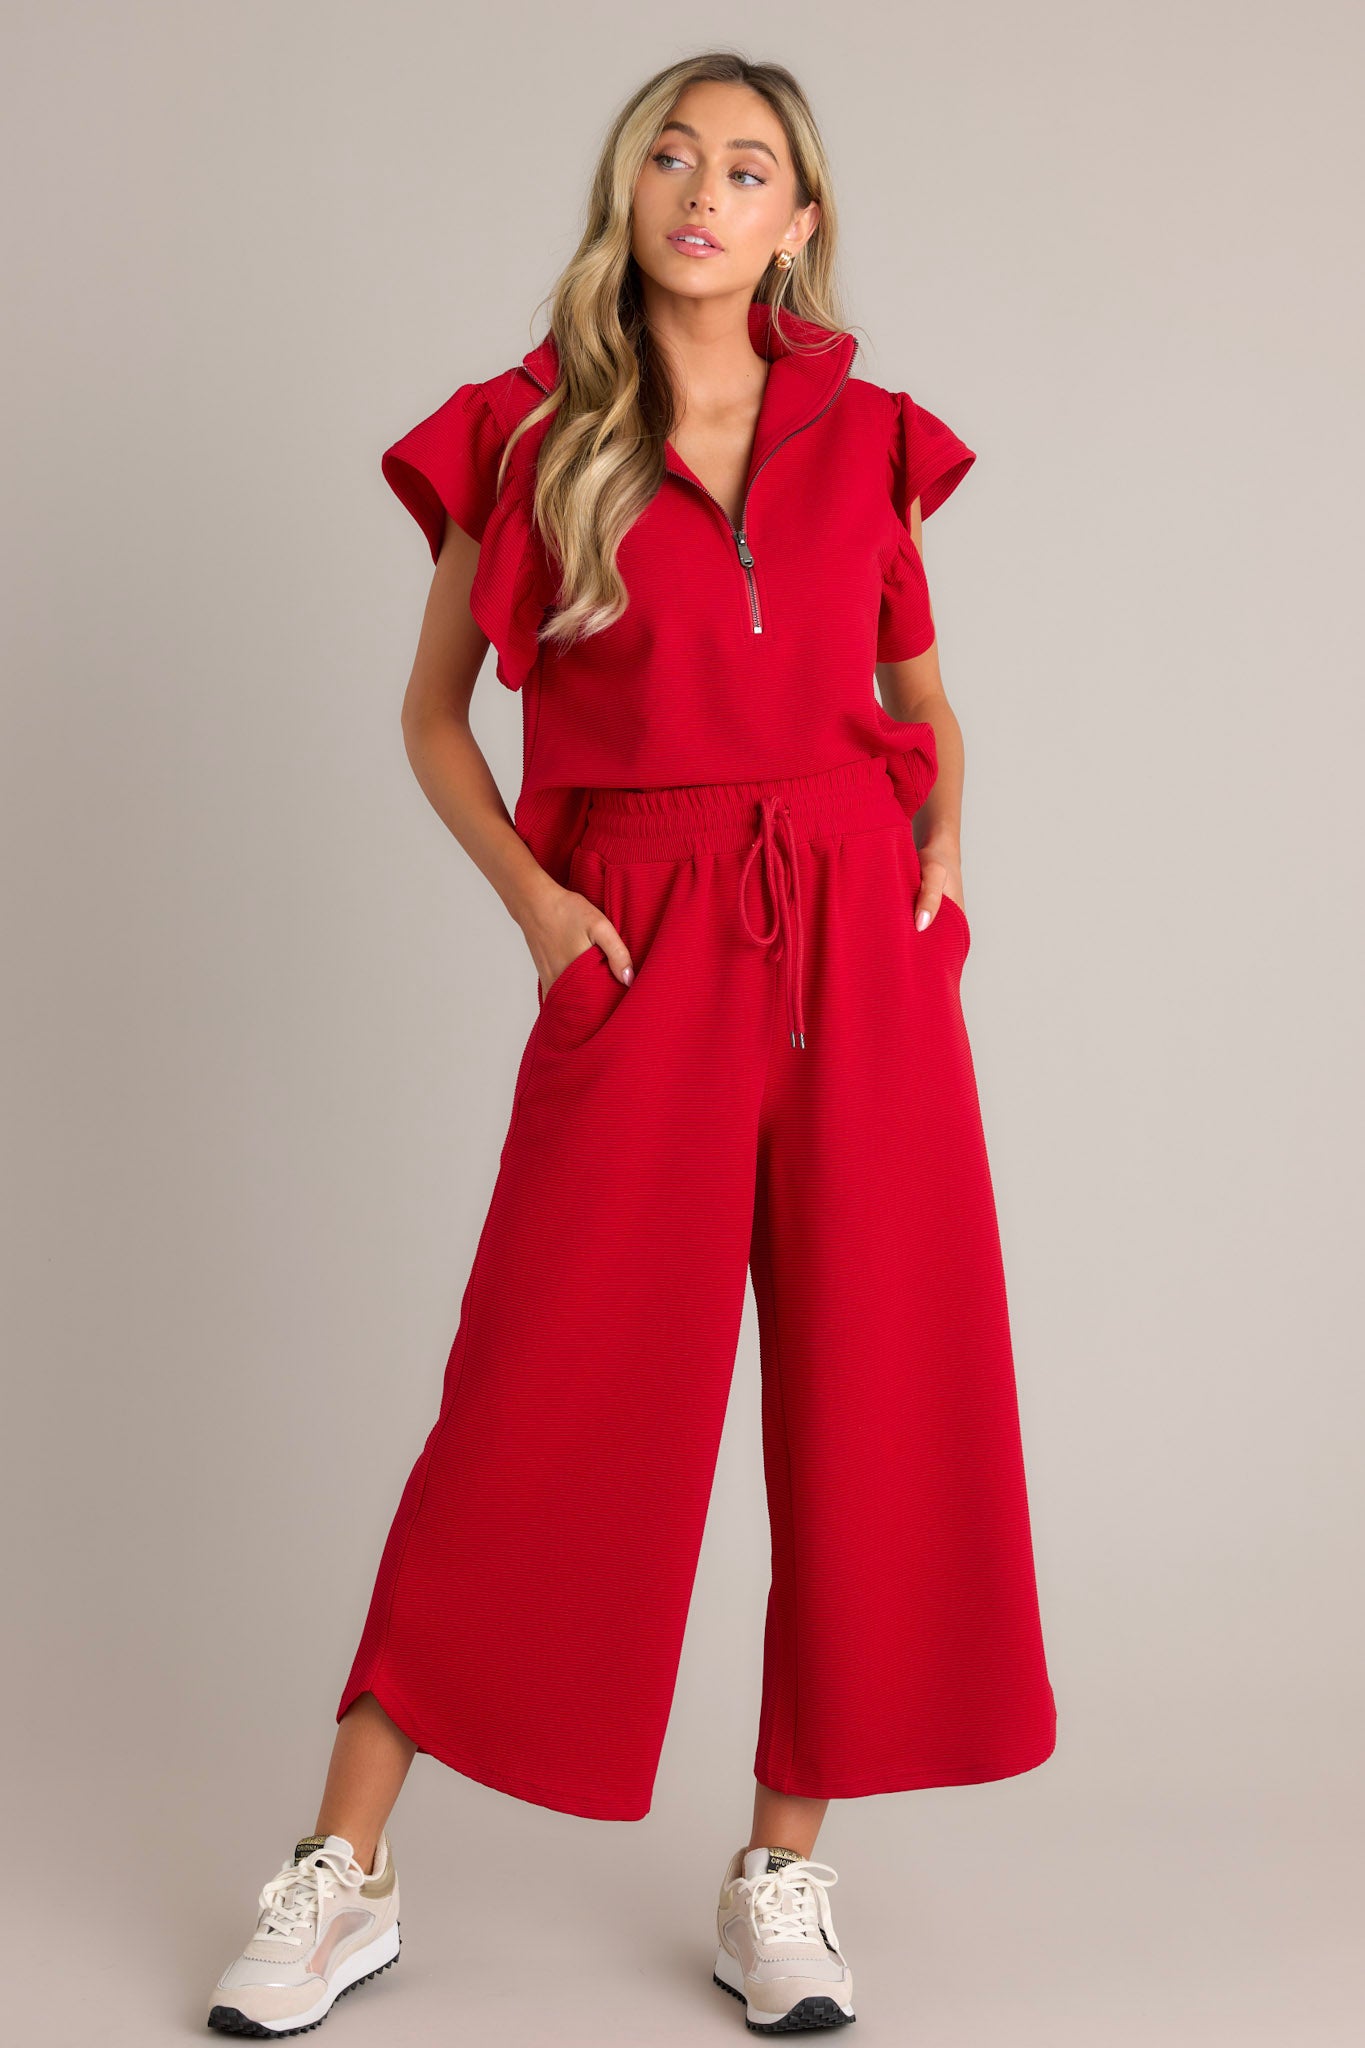 Full length view of a red top with a functional zip up neckline, ribbed fabric, wide ruffled sleeves, and a thick hemline